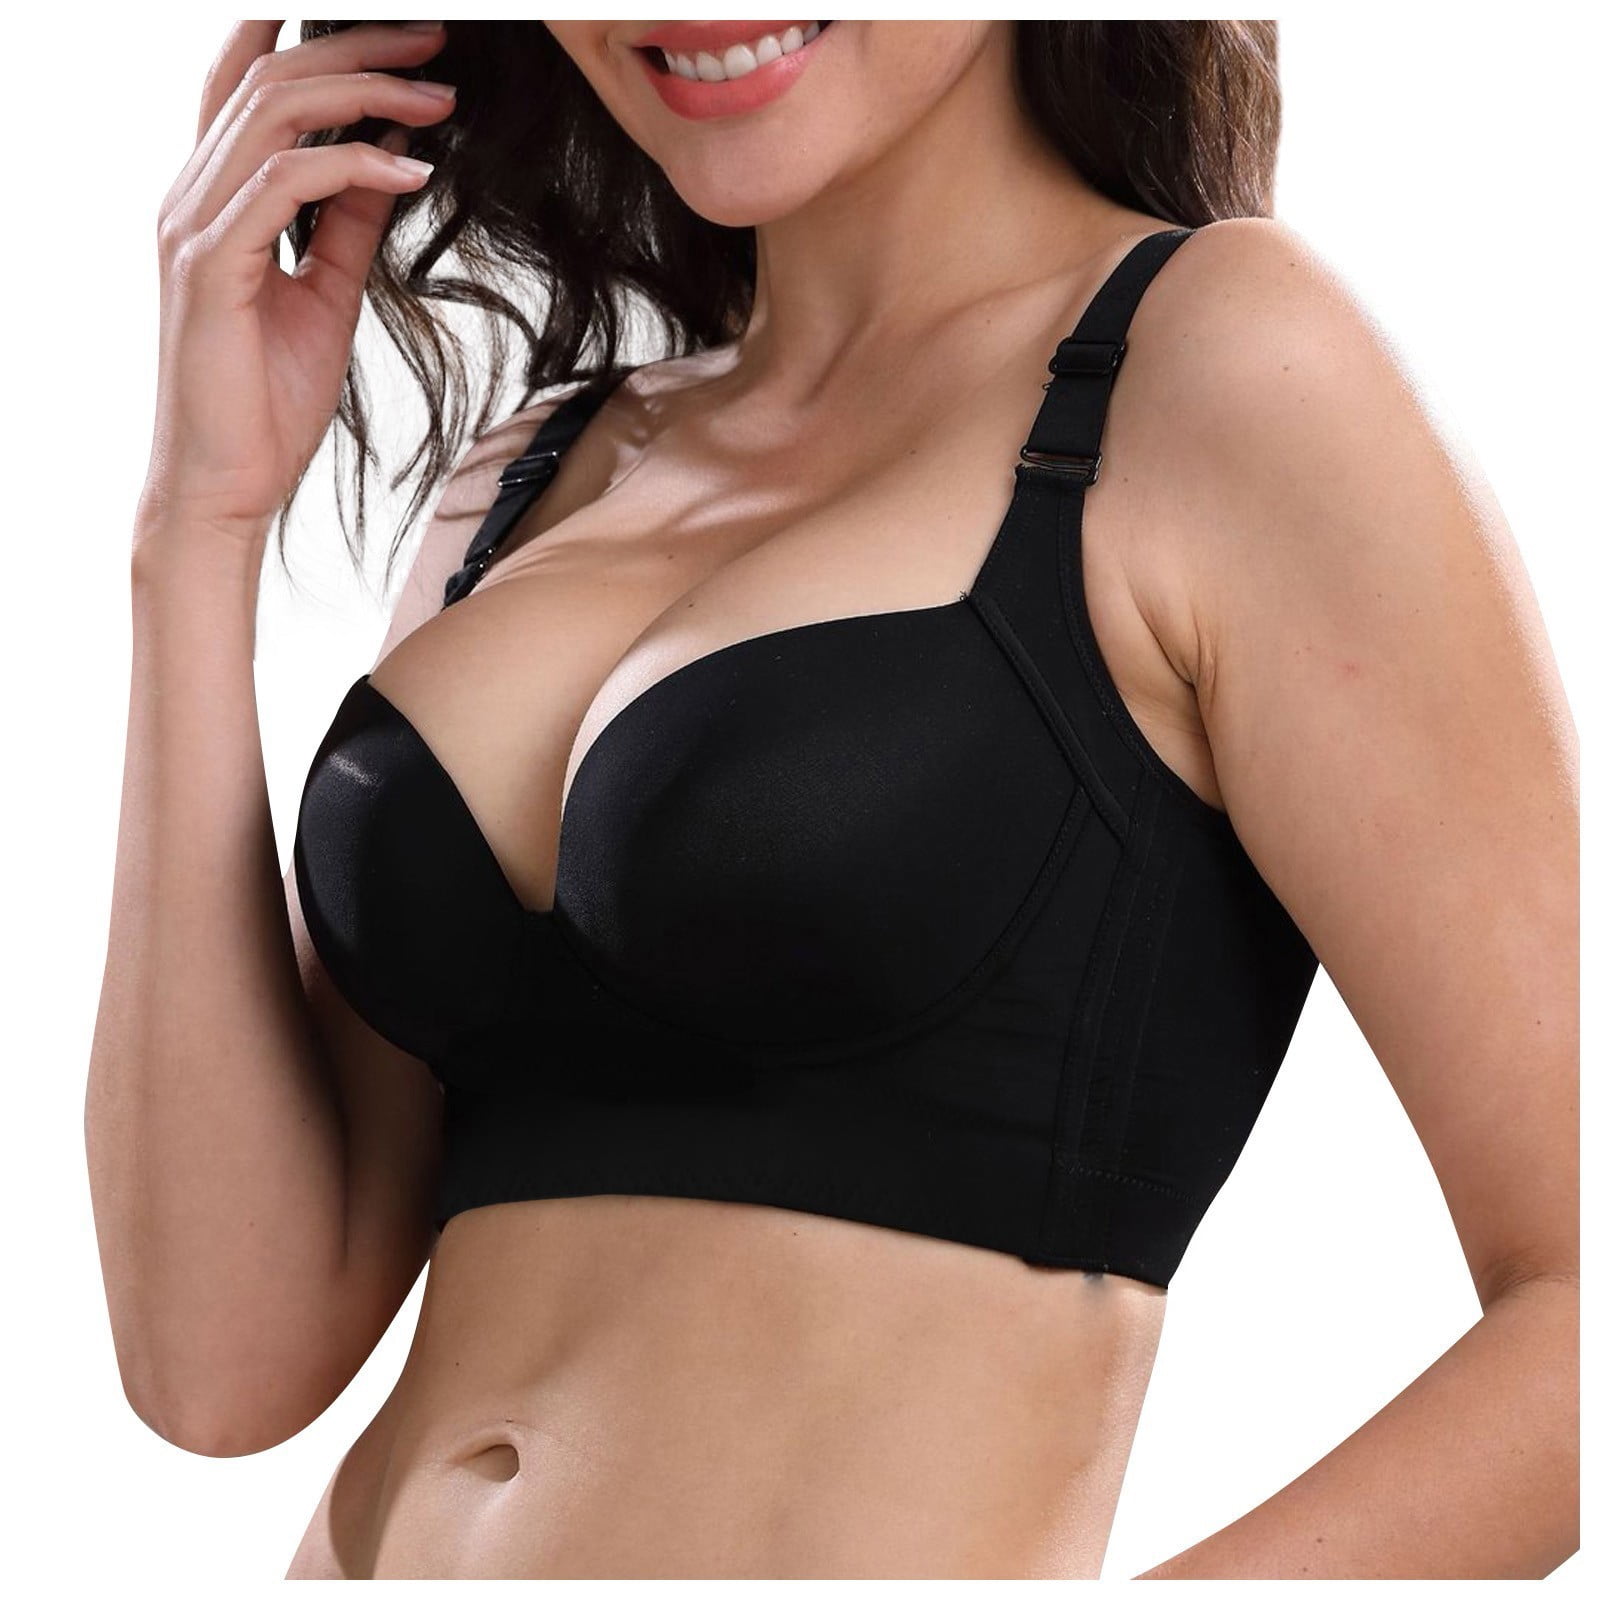 Deep Cup Bra Hides Back Fat Diva New Look Bra With Shapewear Incorporated 